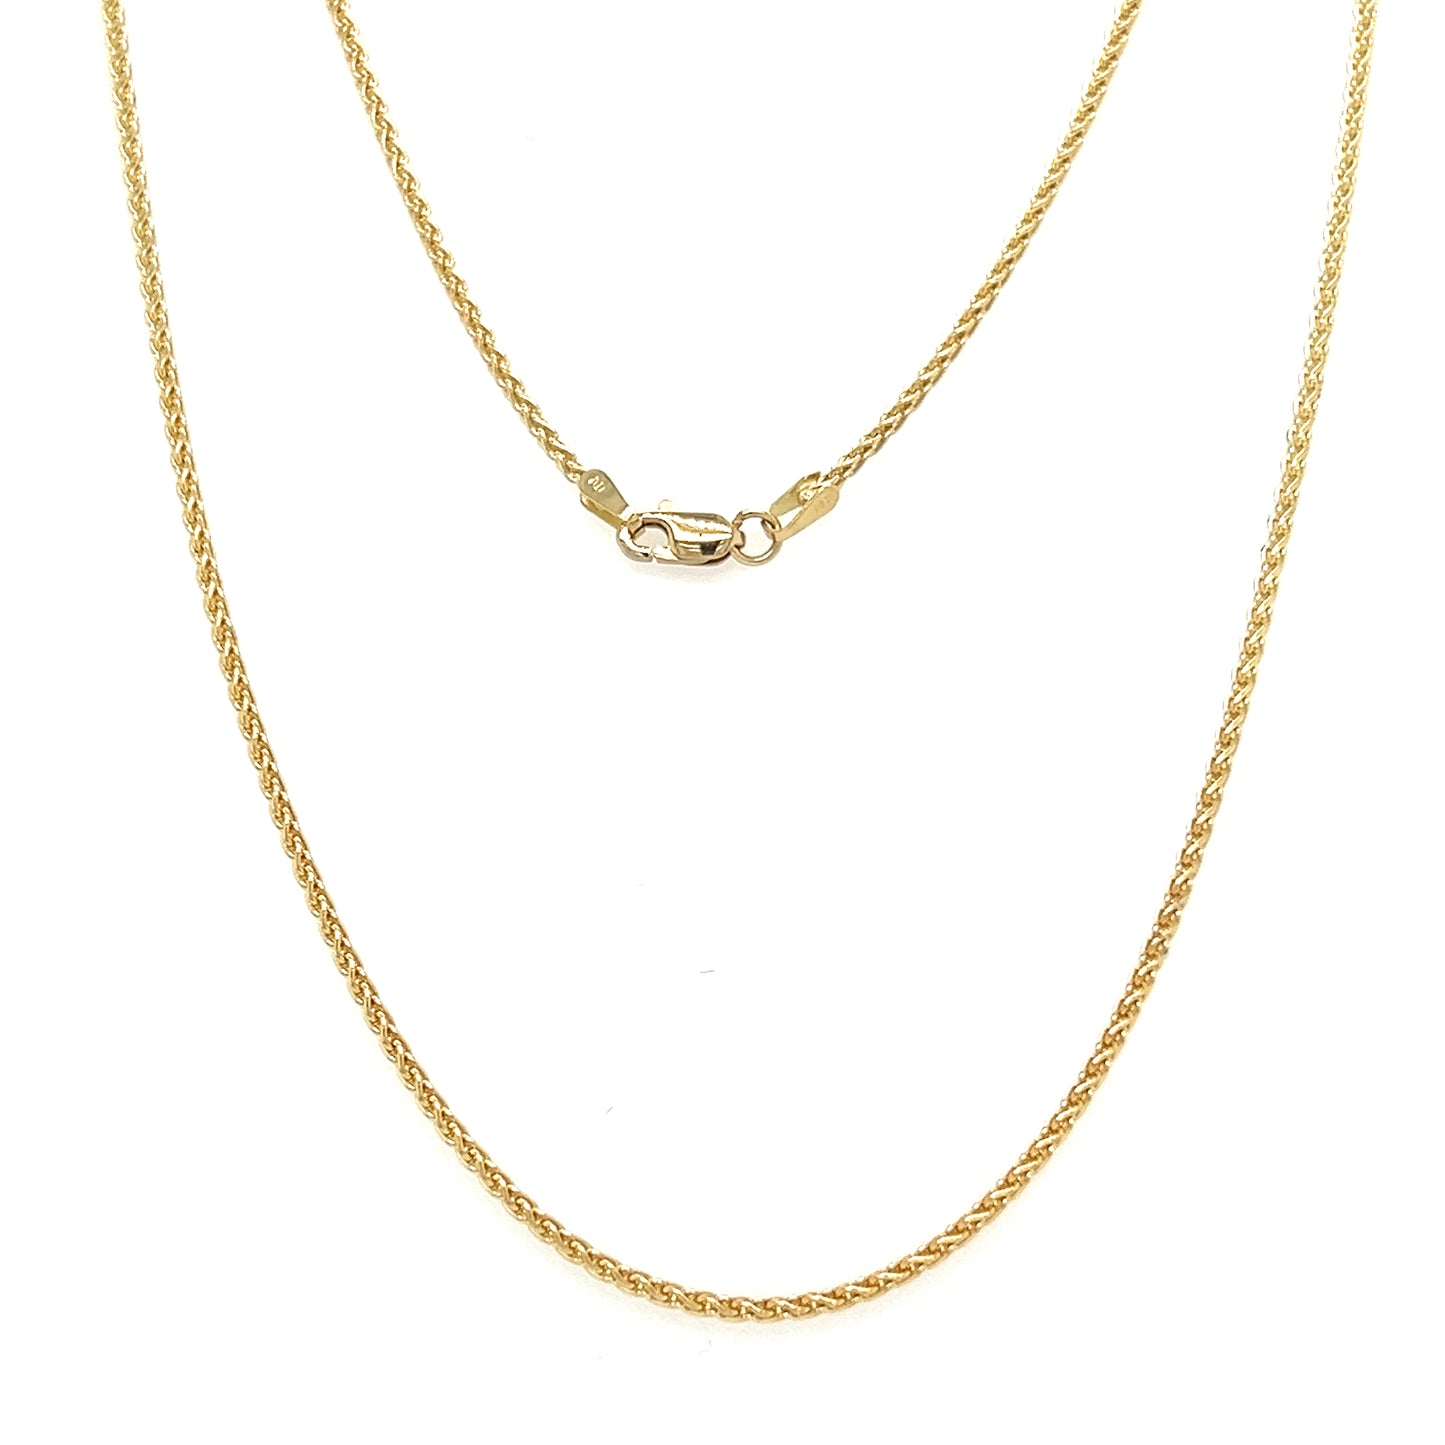 Wheat Chain 1.5mm with 20in Length in 14K Yellow Gold Full Chain View